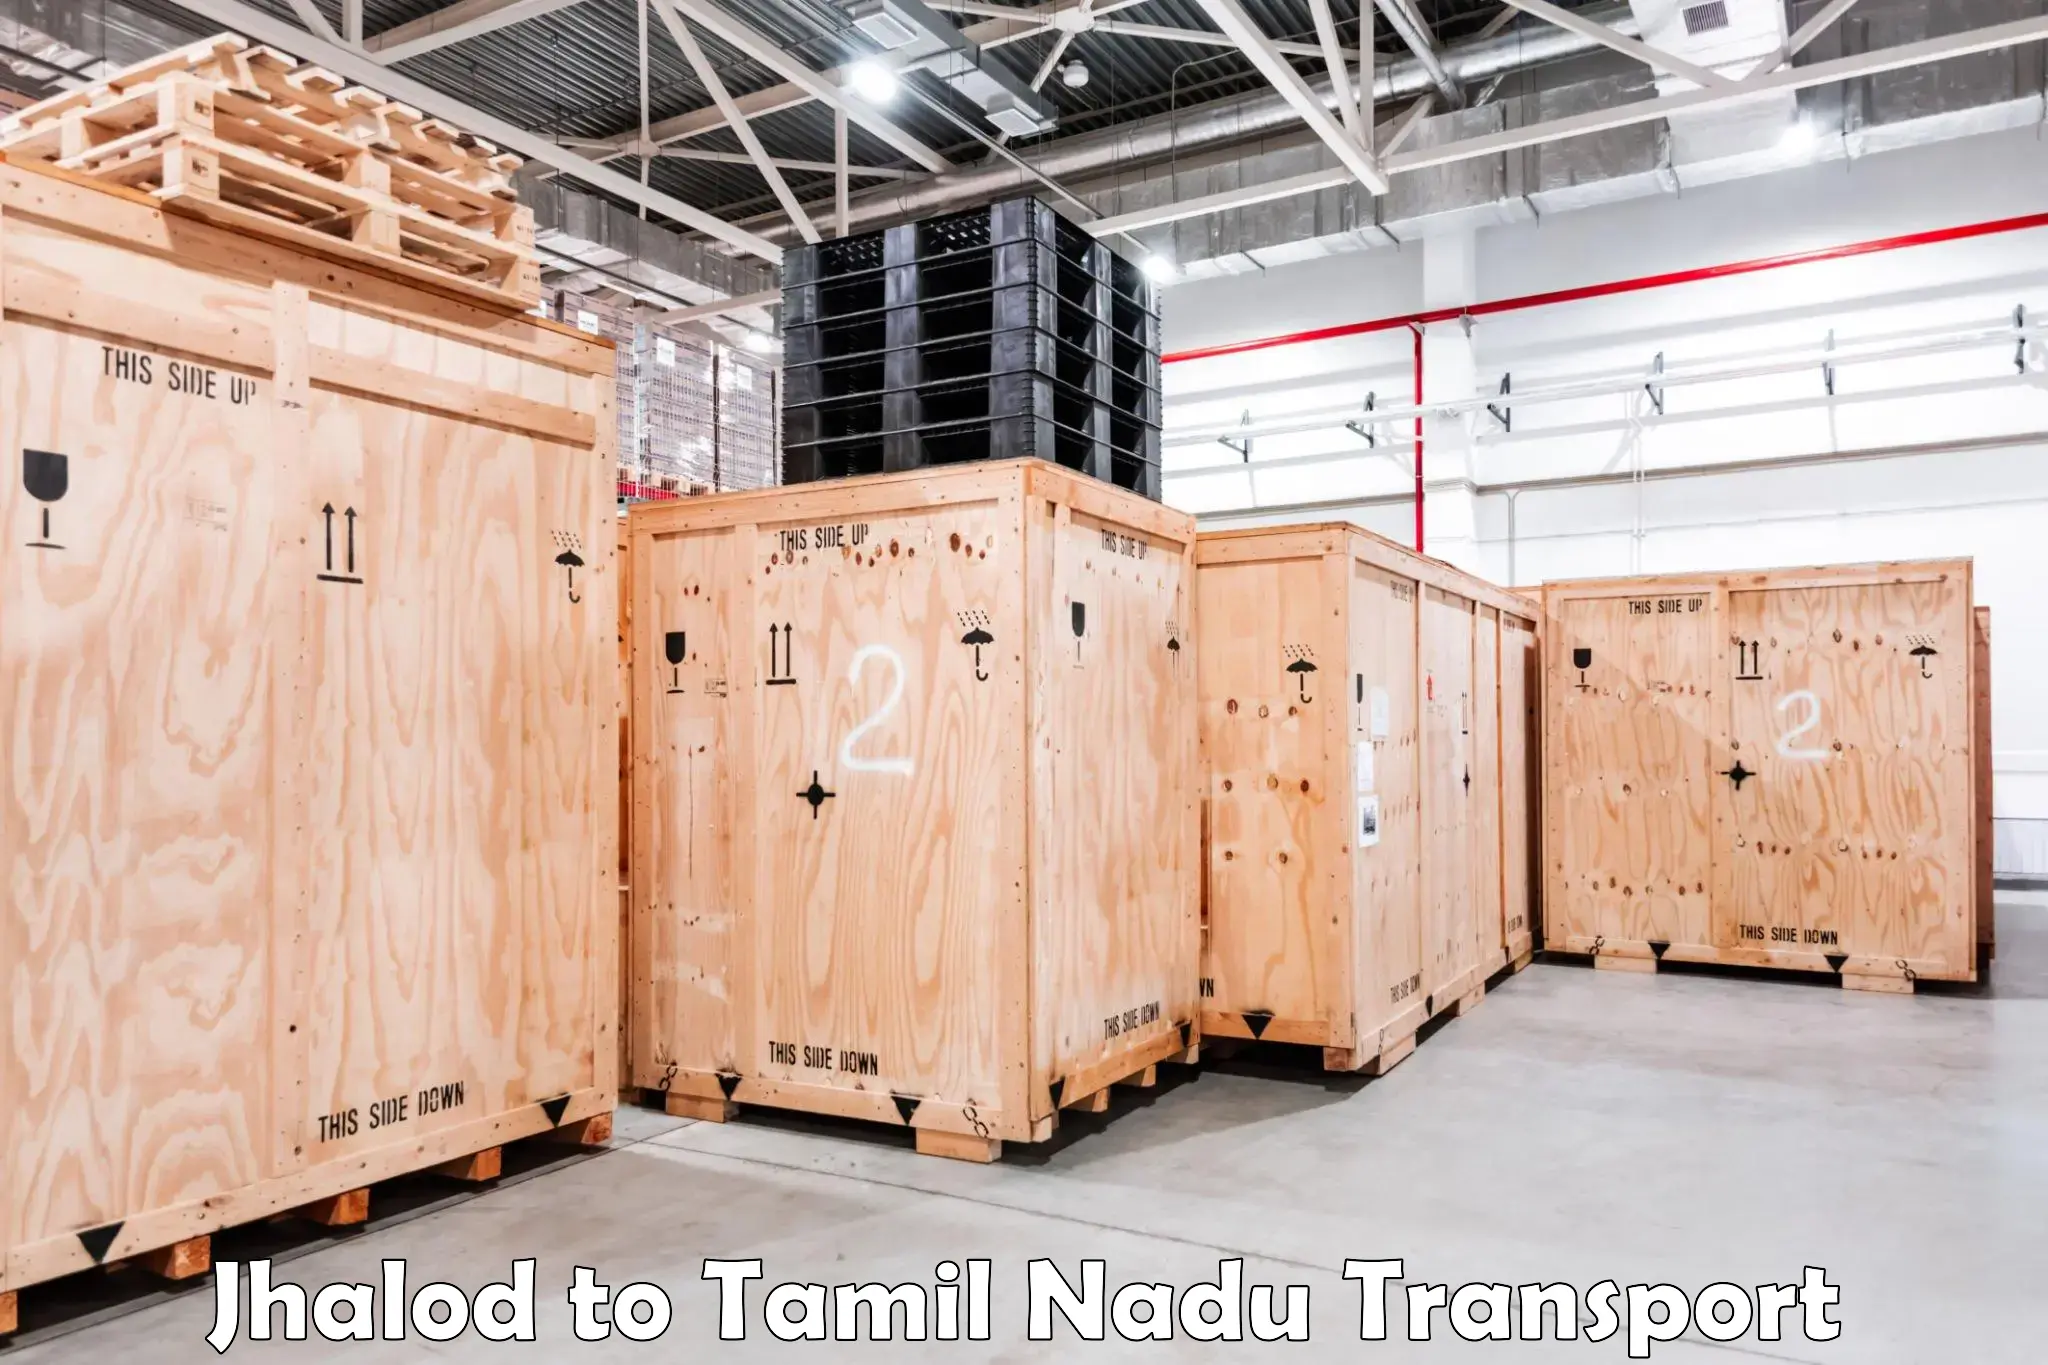 Part load transport service in India Jhalod to Chennai Port